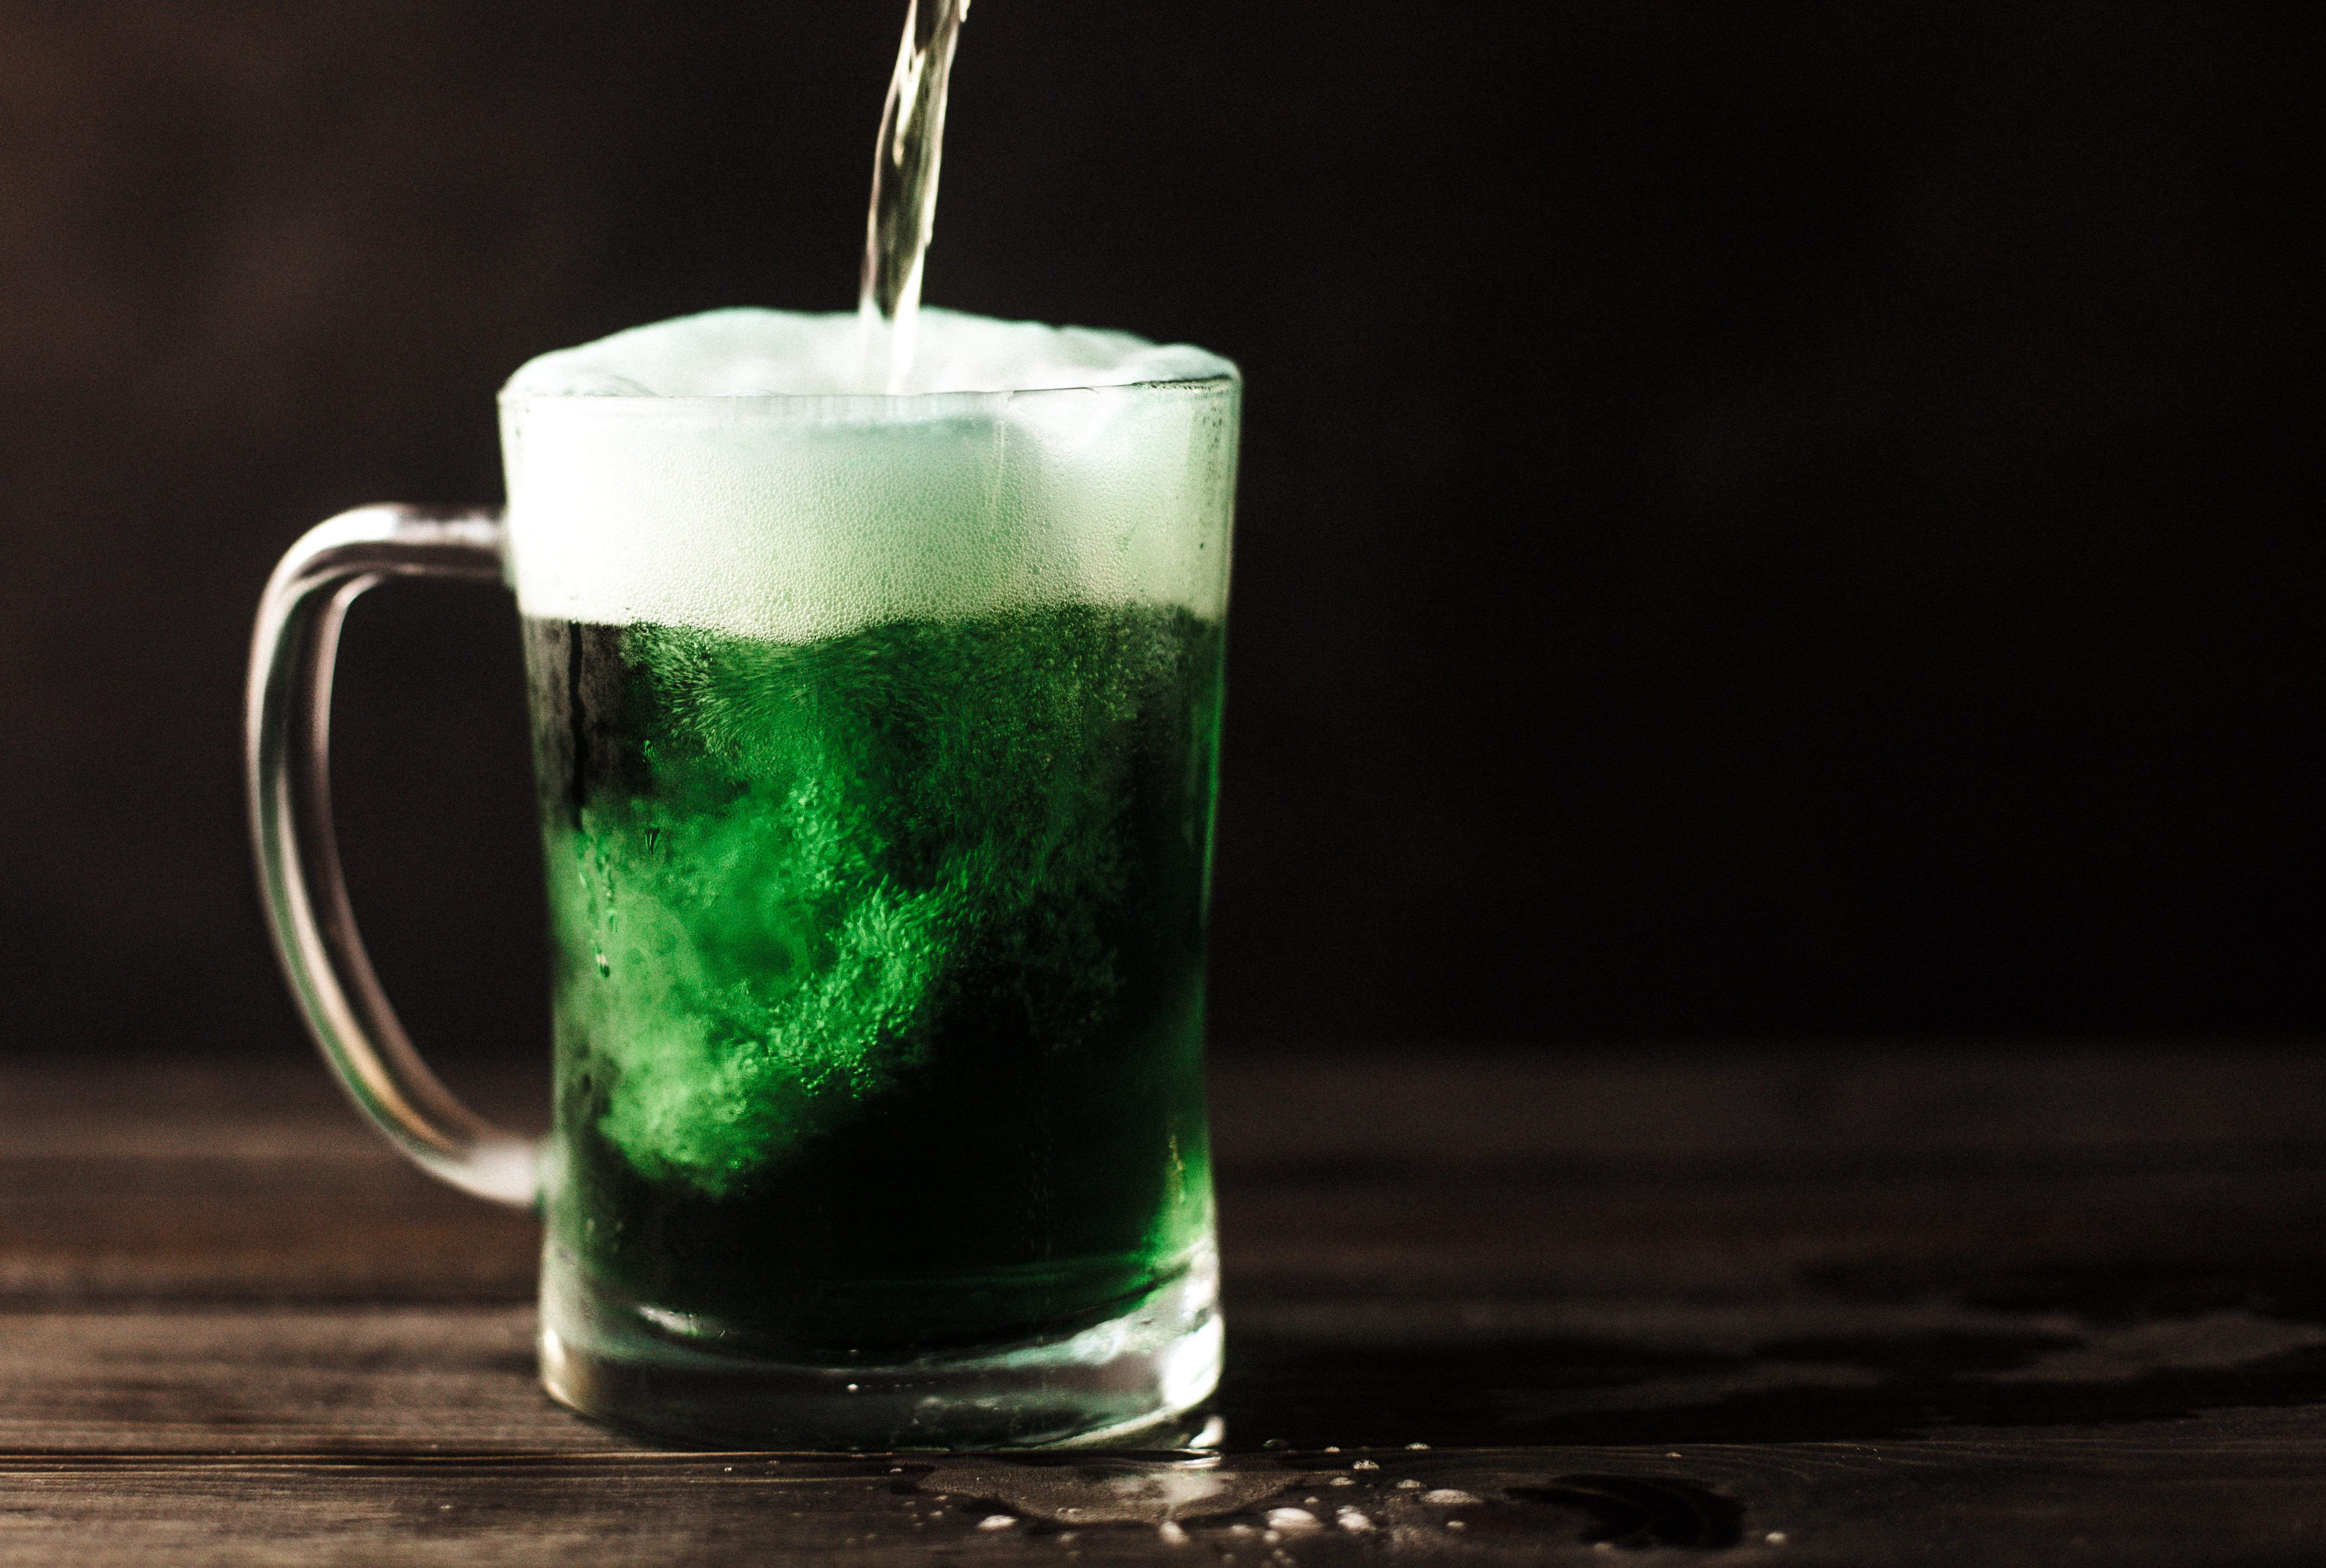 Brad Roemer's Tips for Hosting a St. Patrick's Day Party